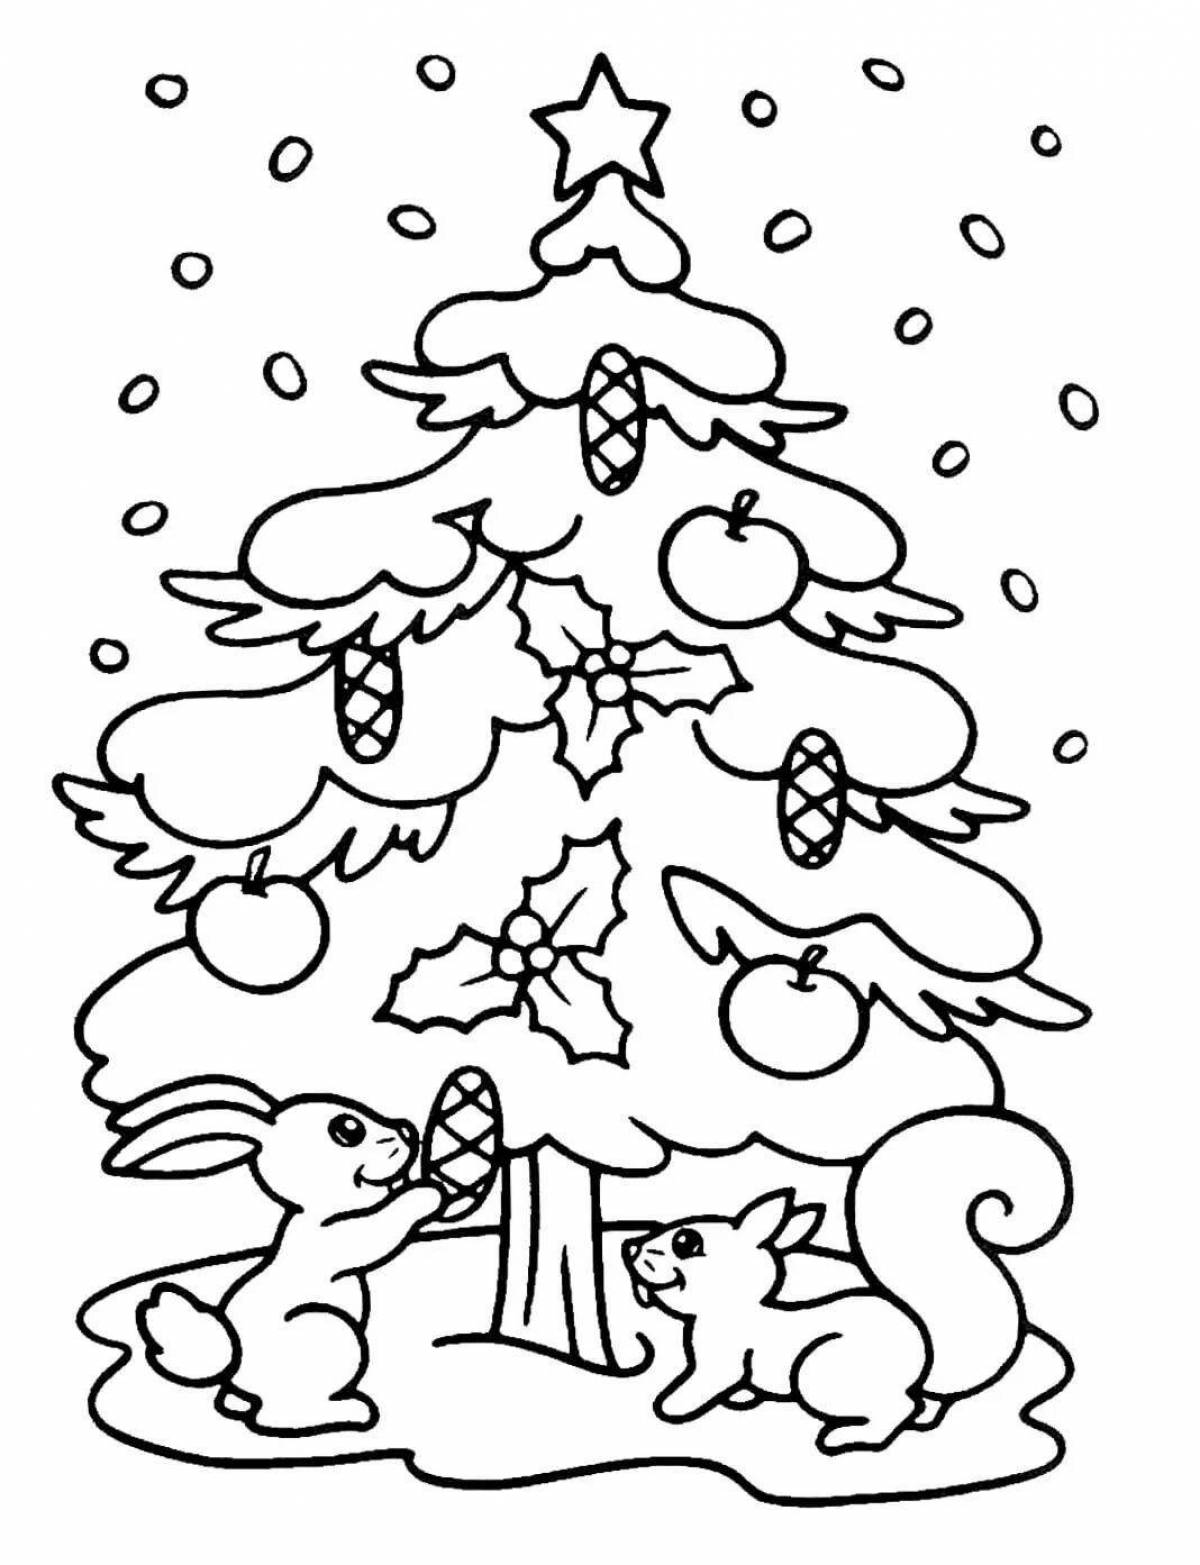 Playful christmas tree coloring page for kids